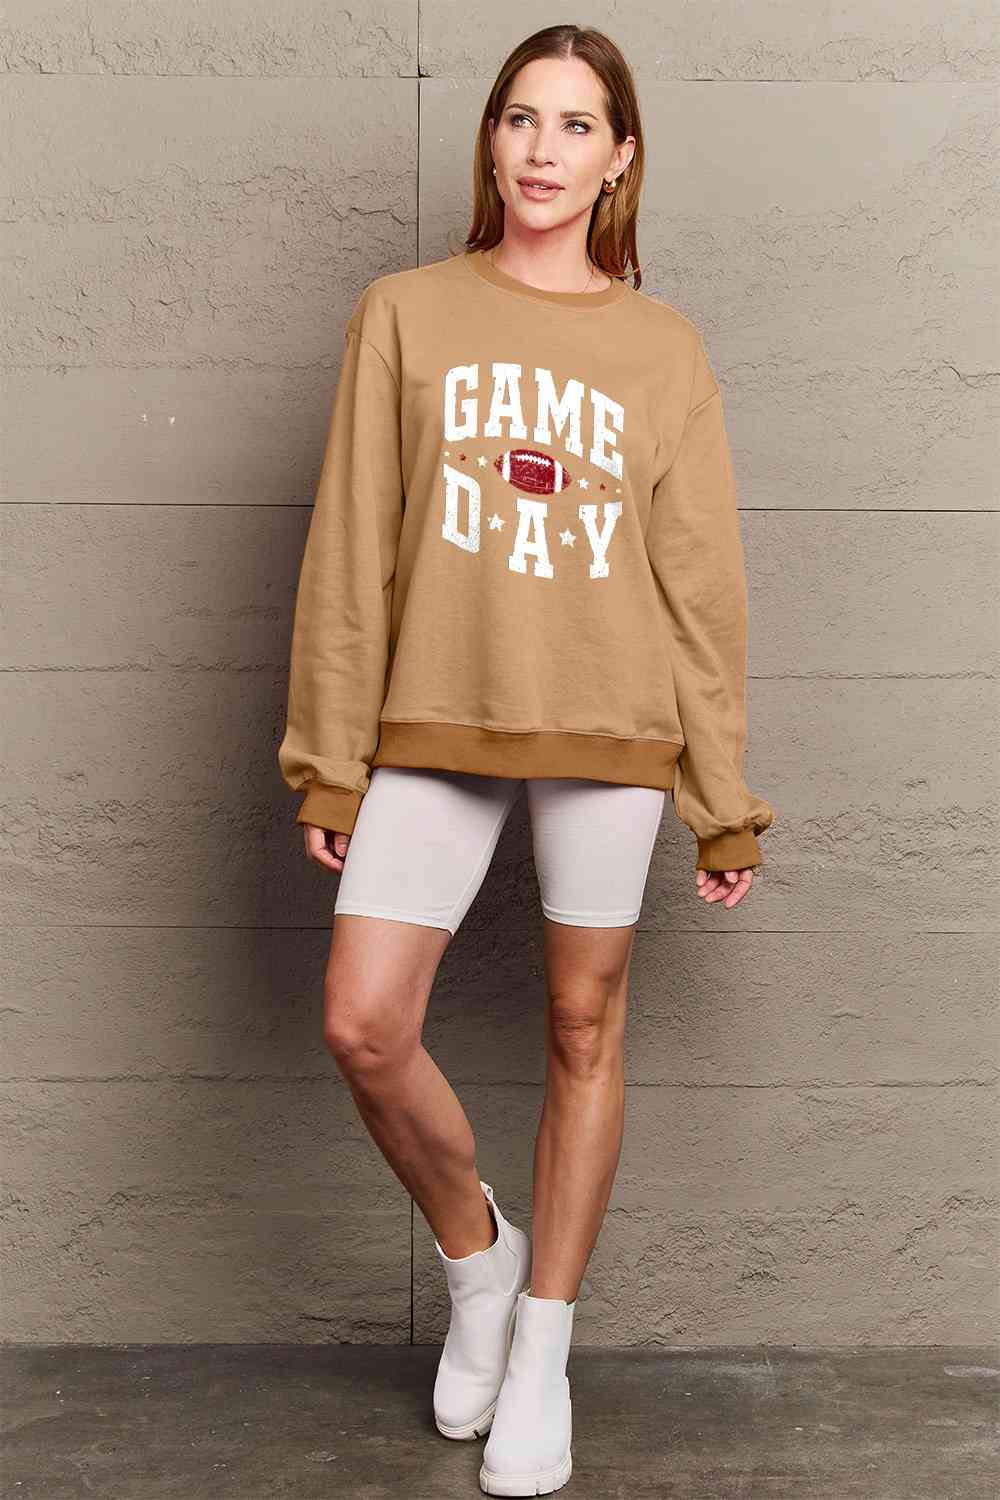 Simply Love Full Size GAME DAY Graphic Sweatshirt - Guy Christopher